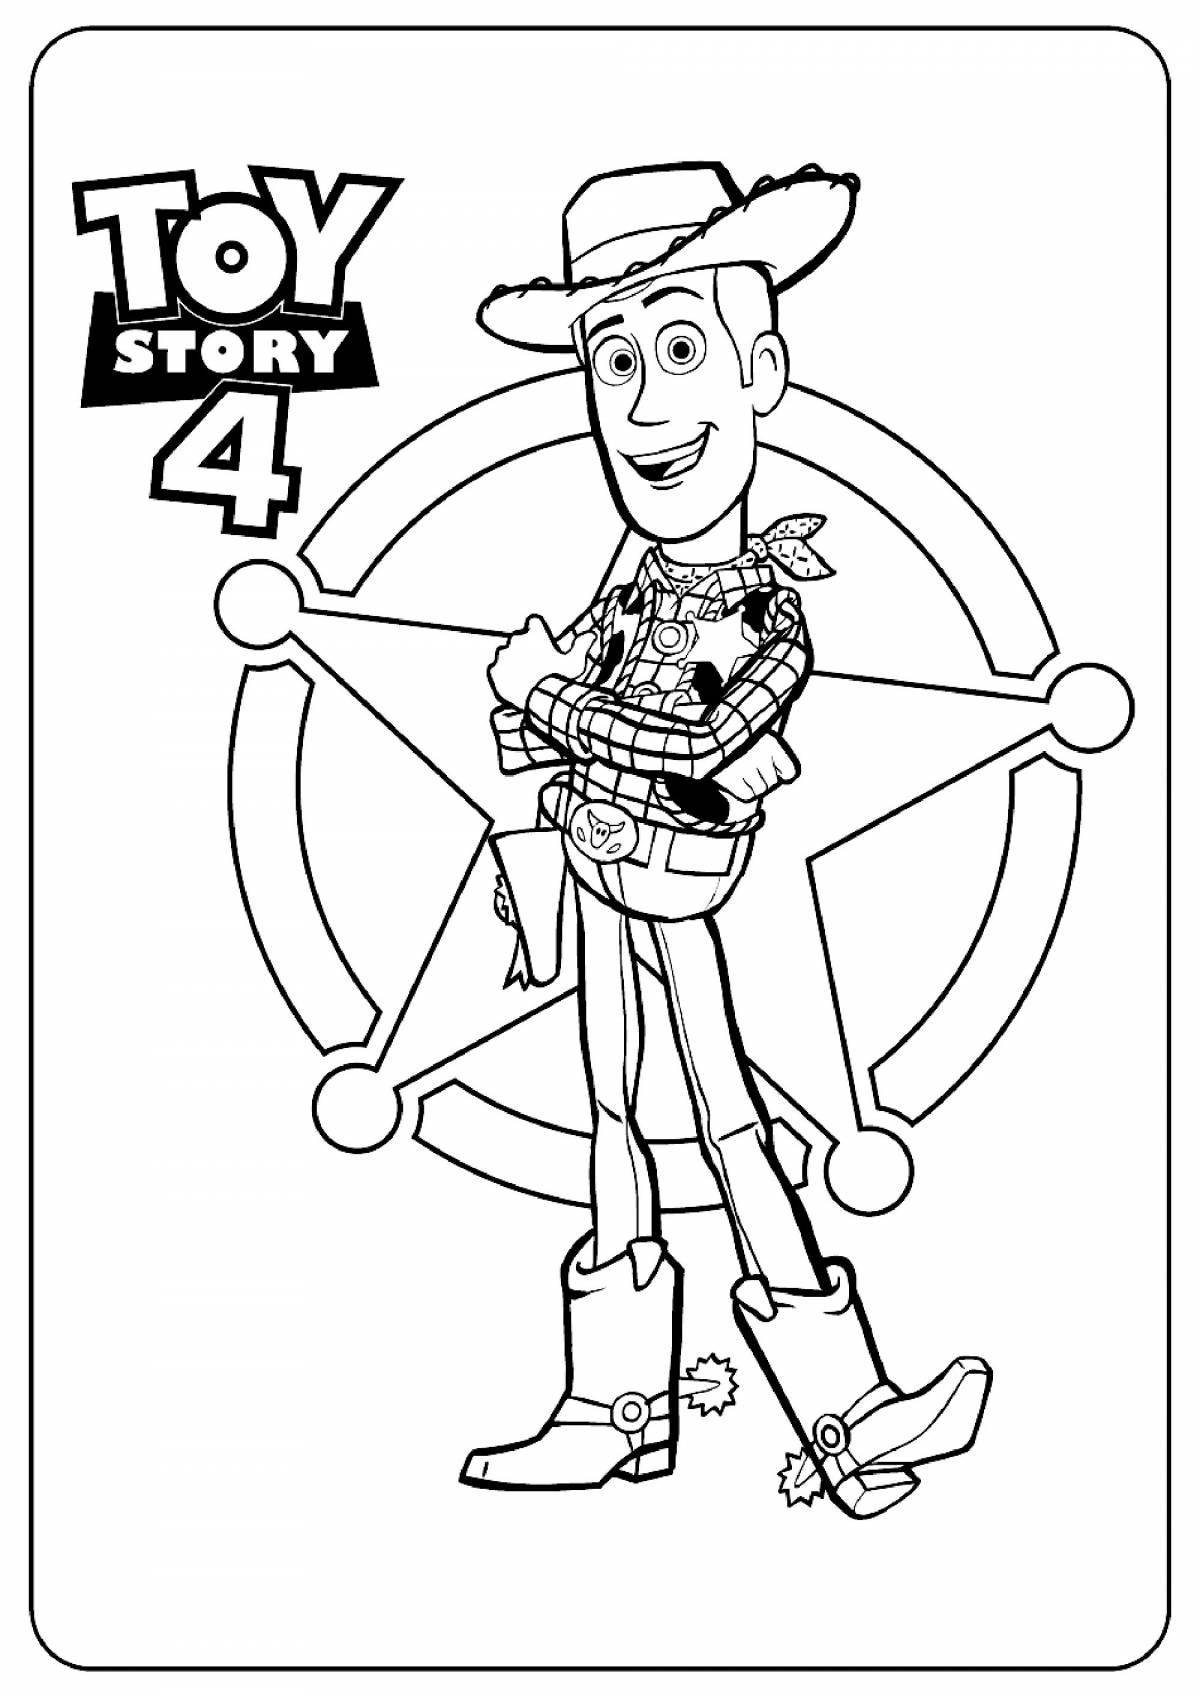 Dramatic story coloring page